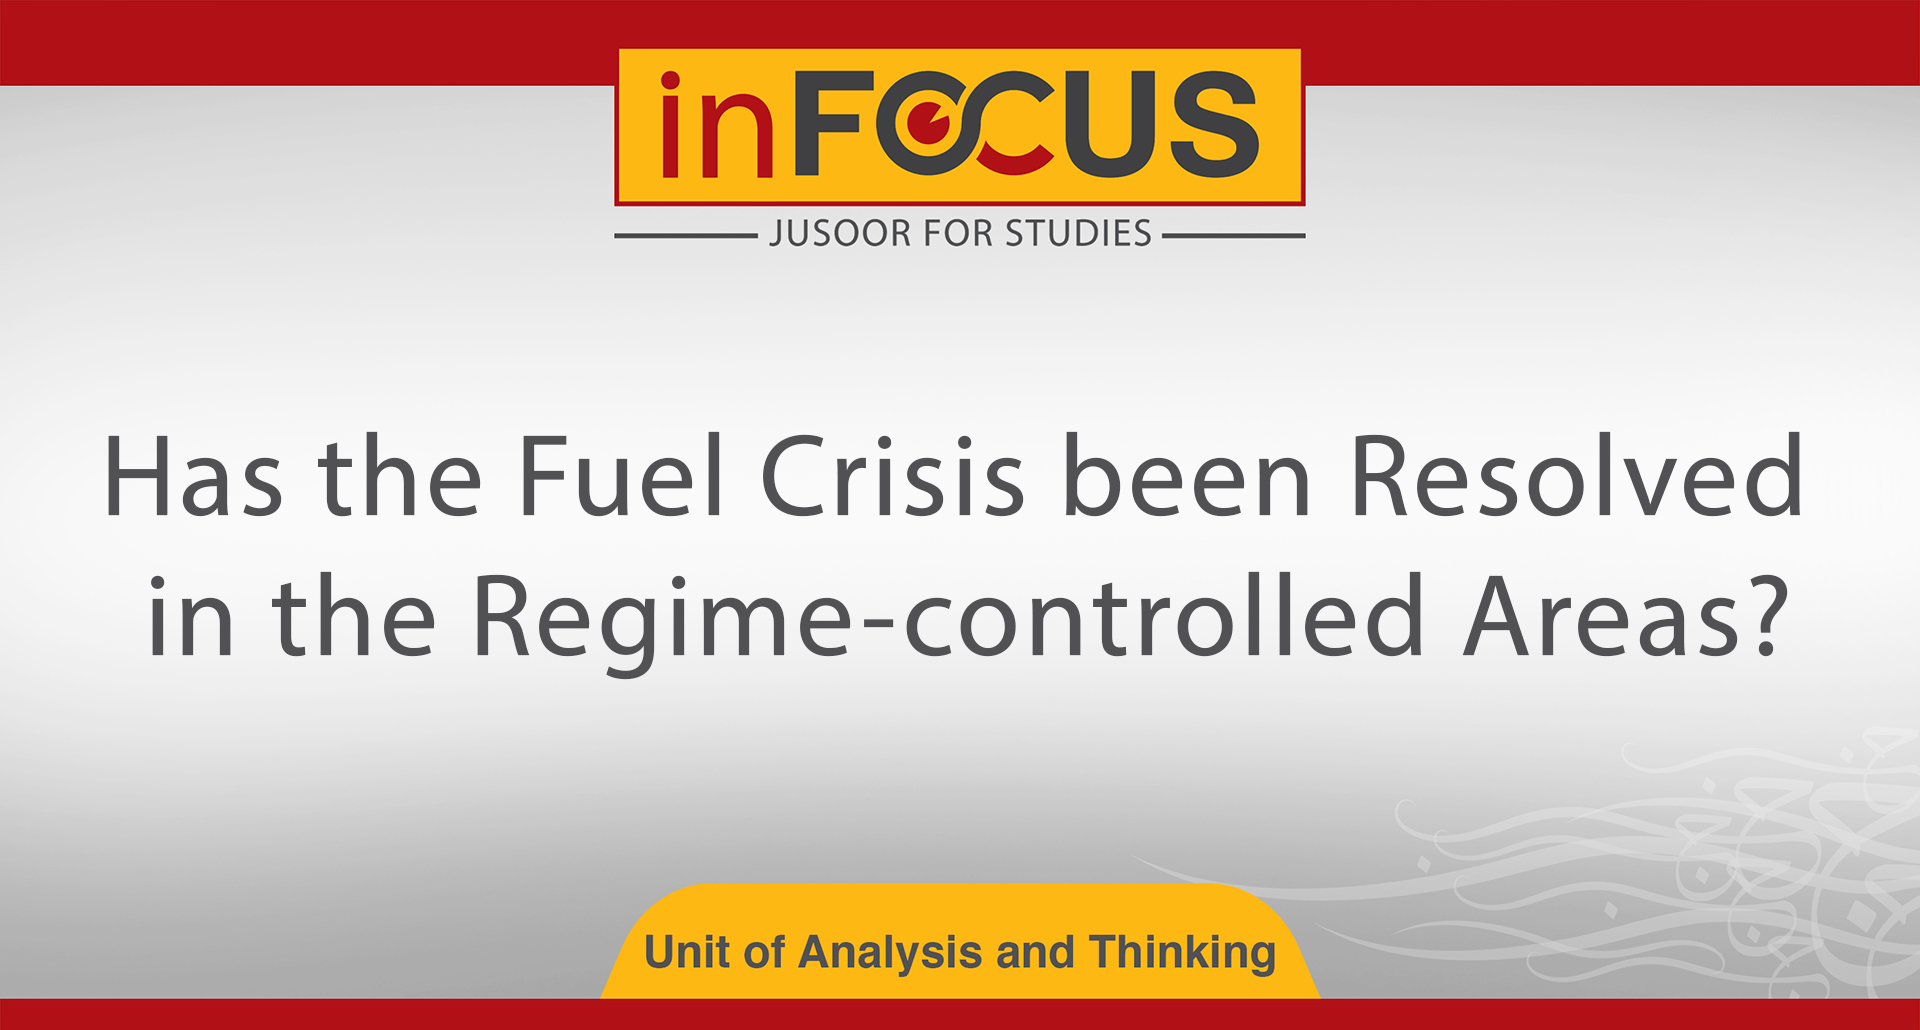 Has the Fuel Crisis been Resolved in the Regime-controlled Areas?